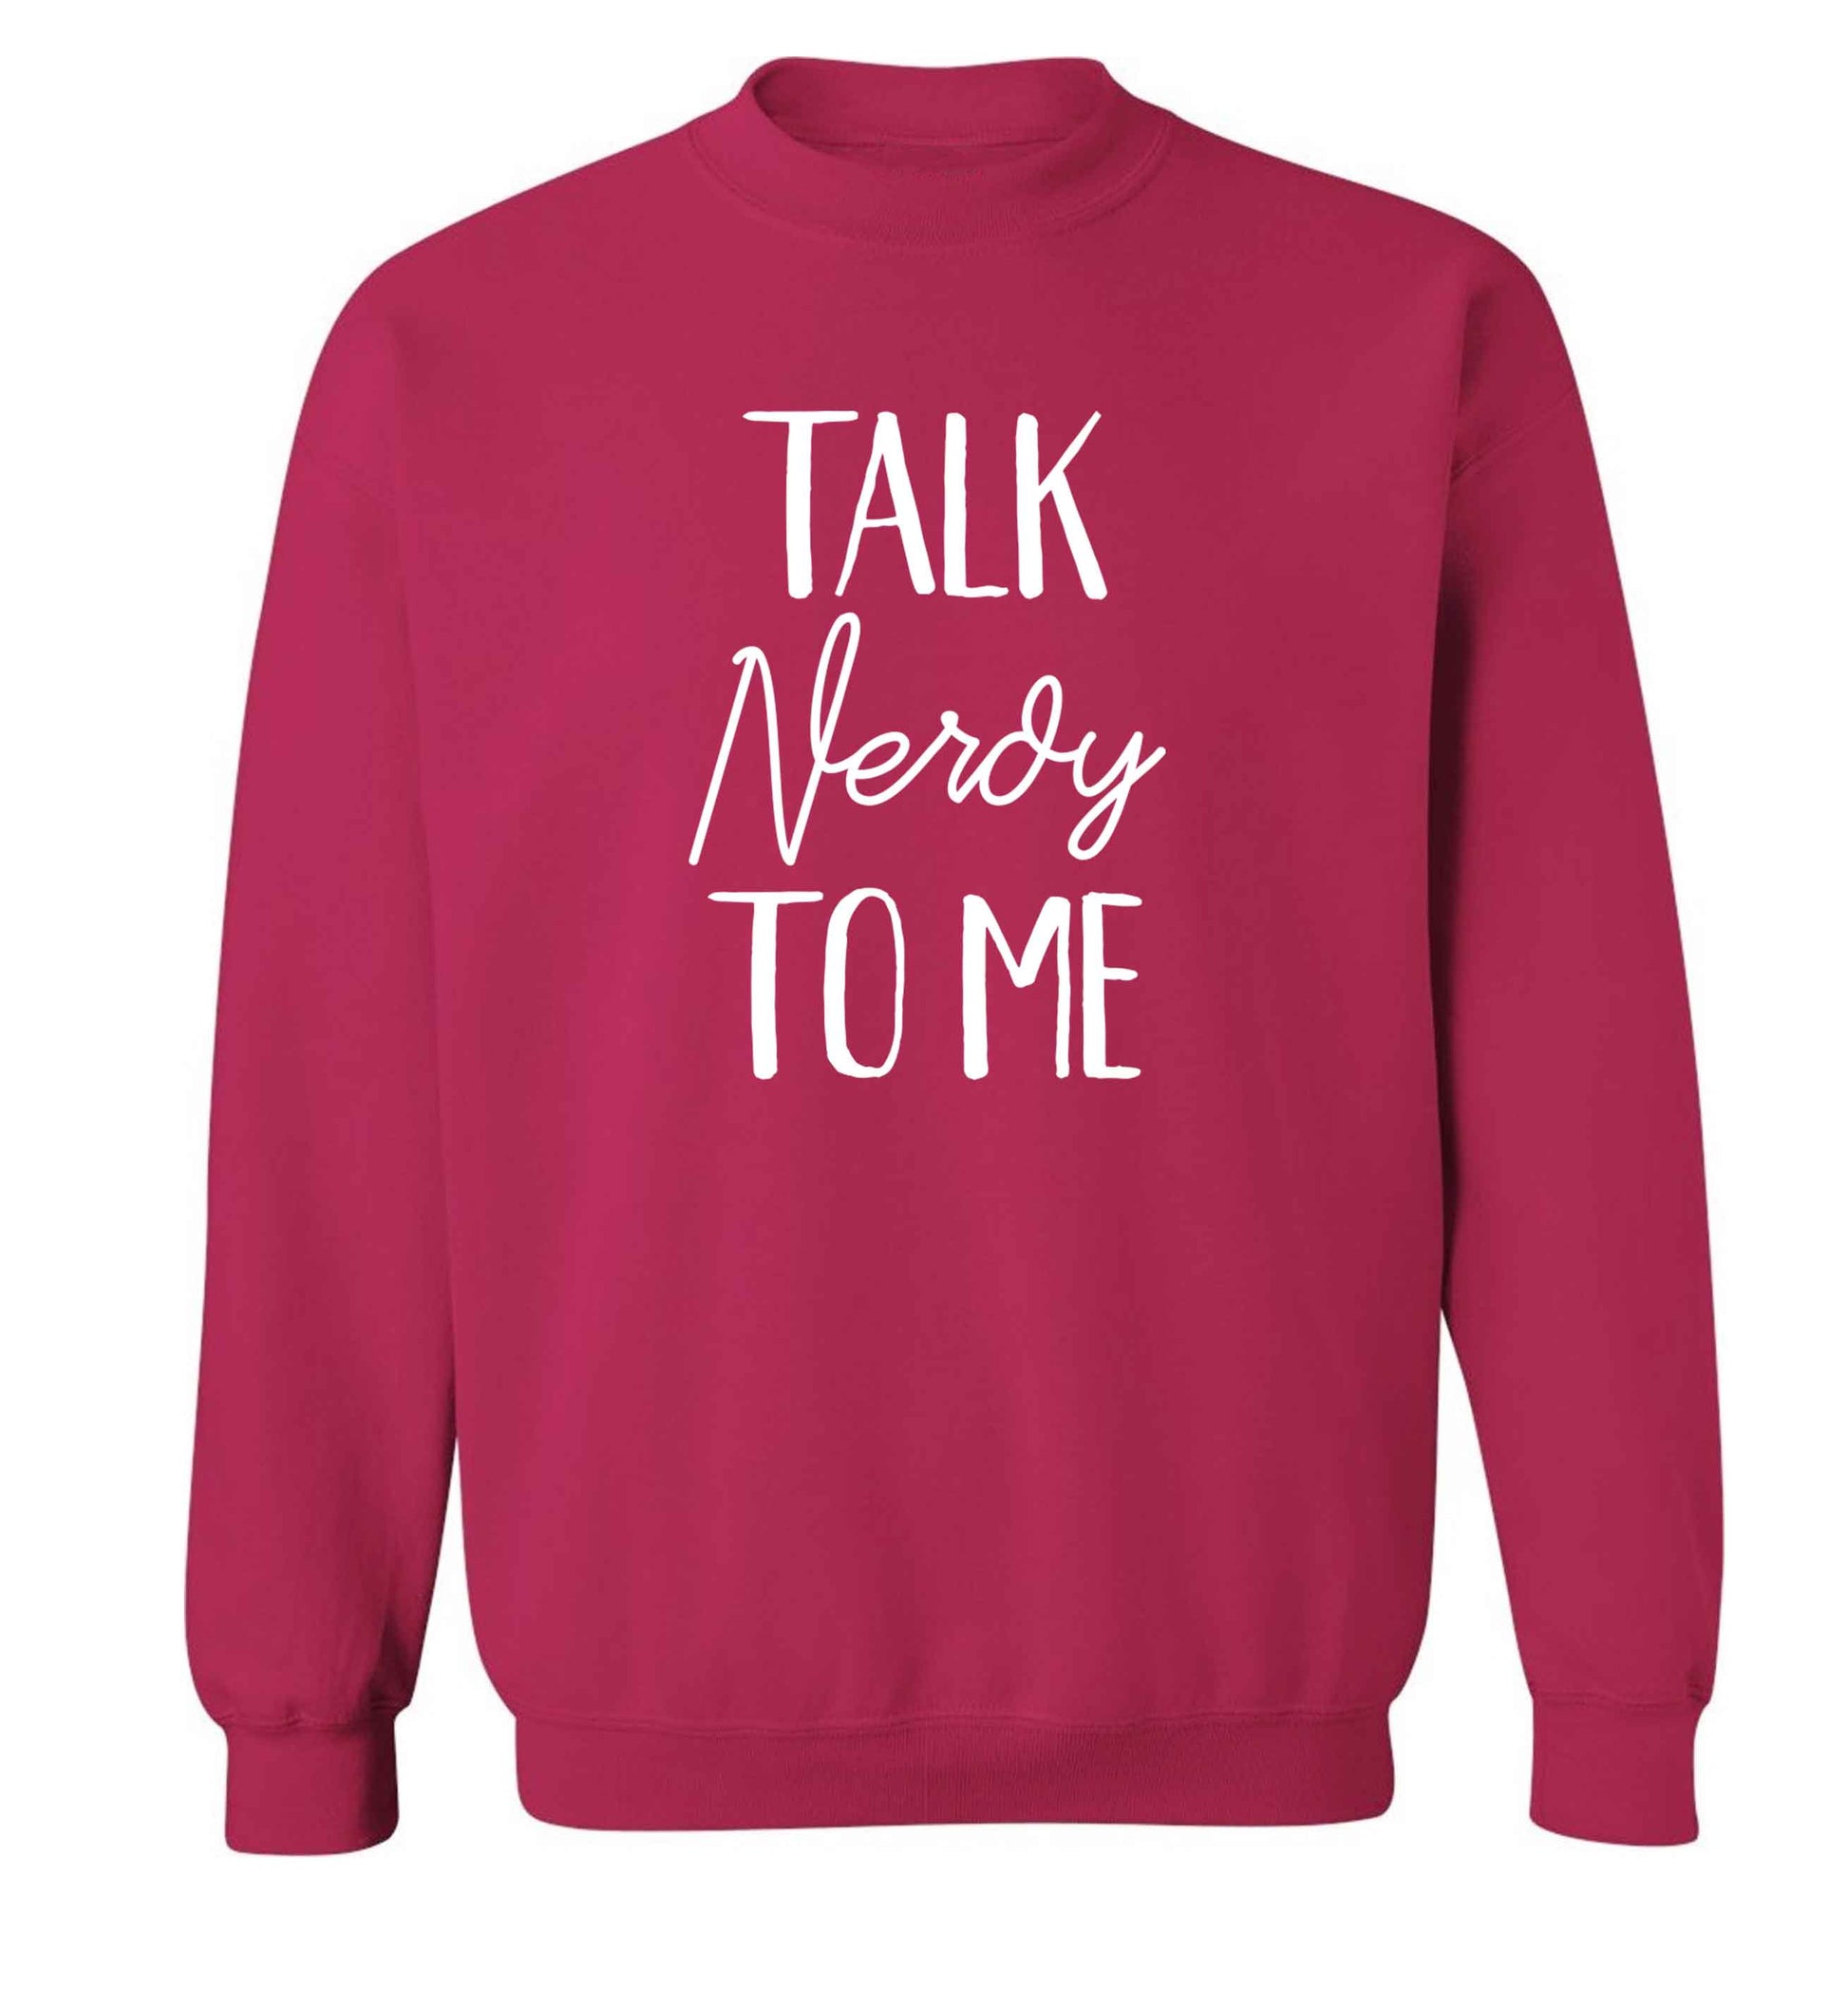 Talk nerdy to me adult's unisex pink sweater 2XL